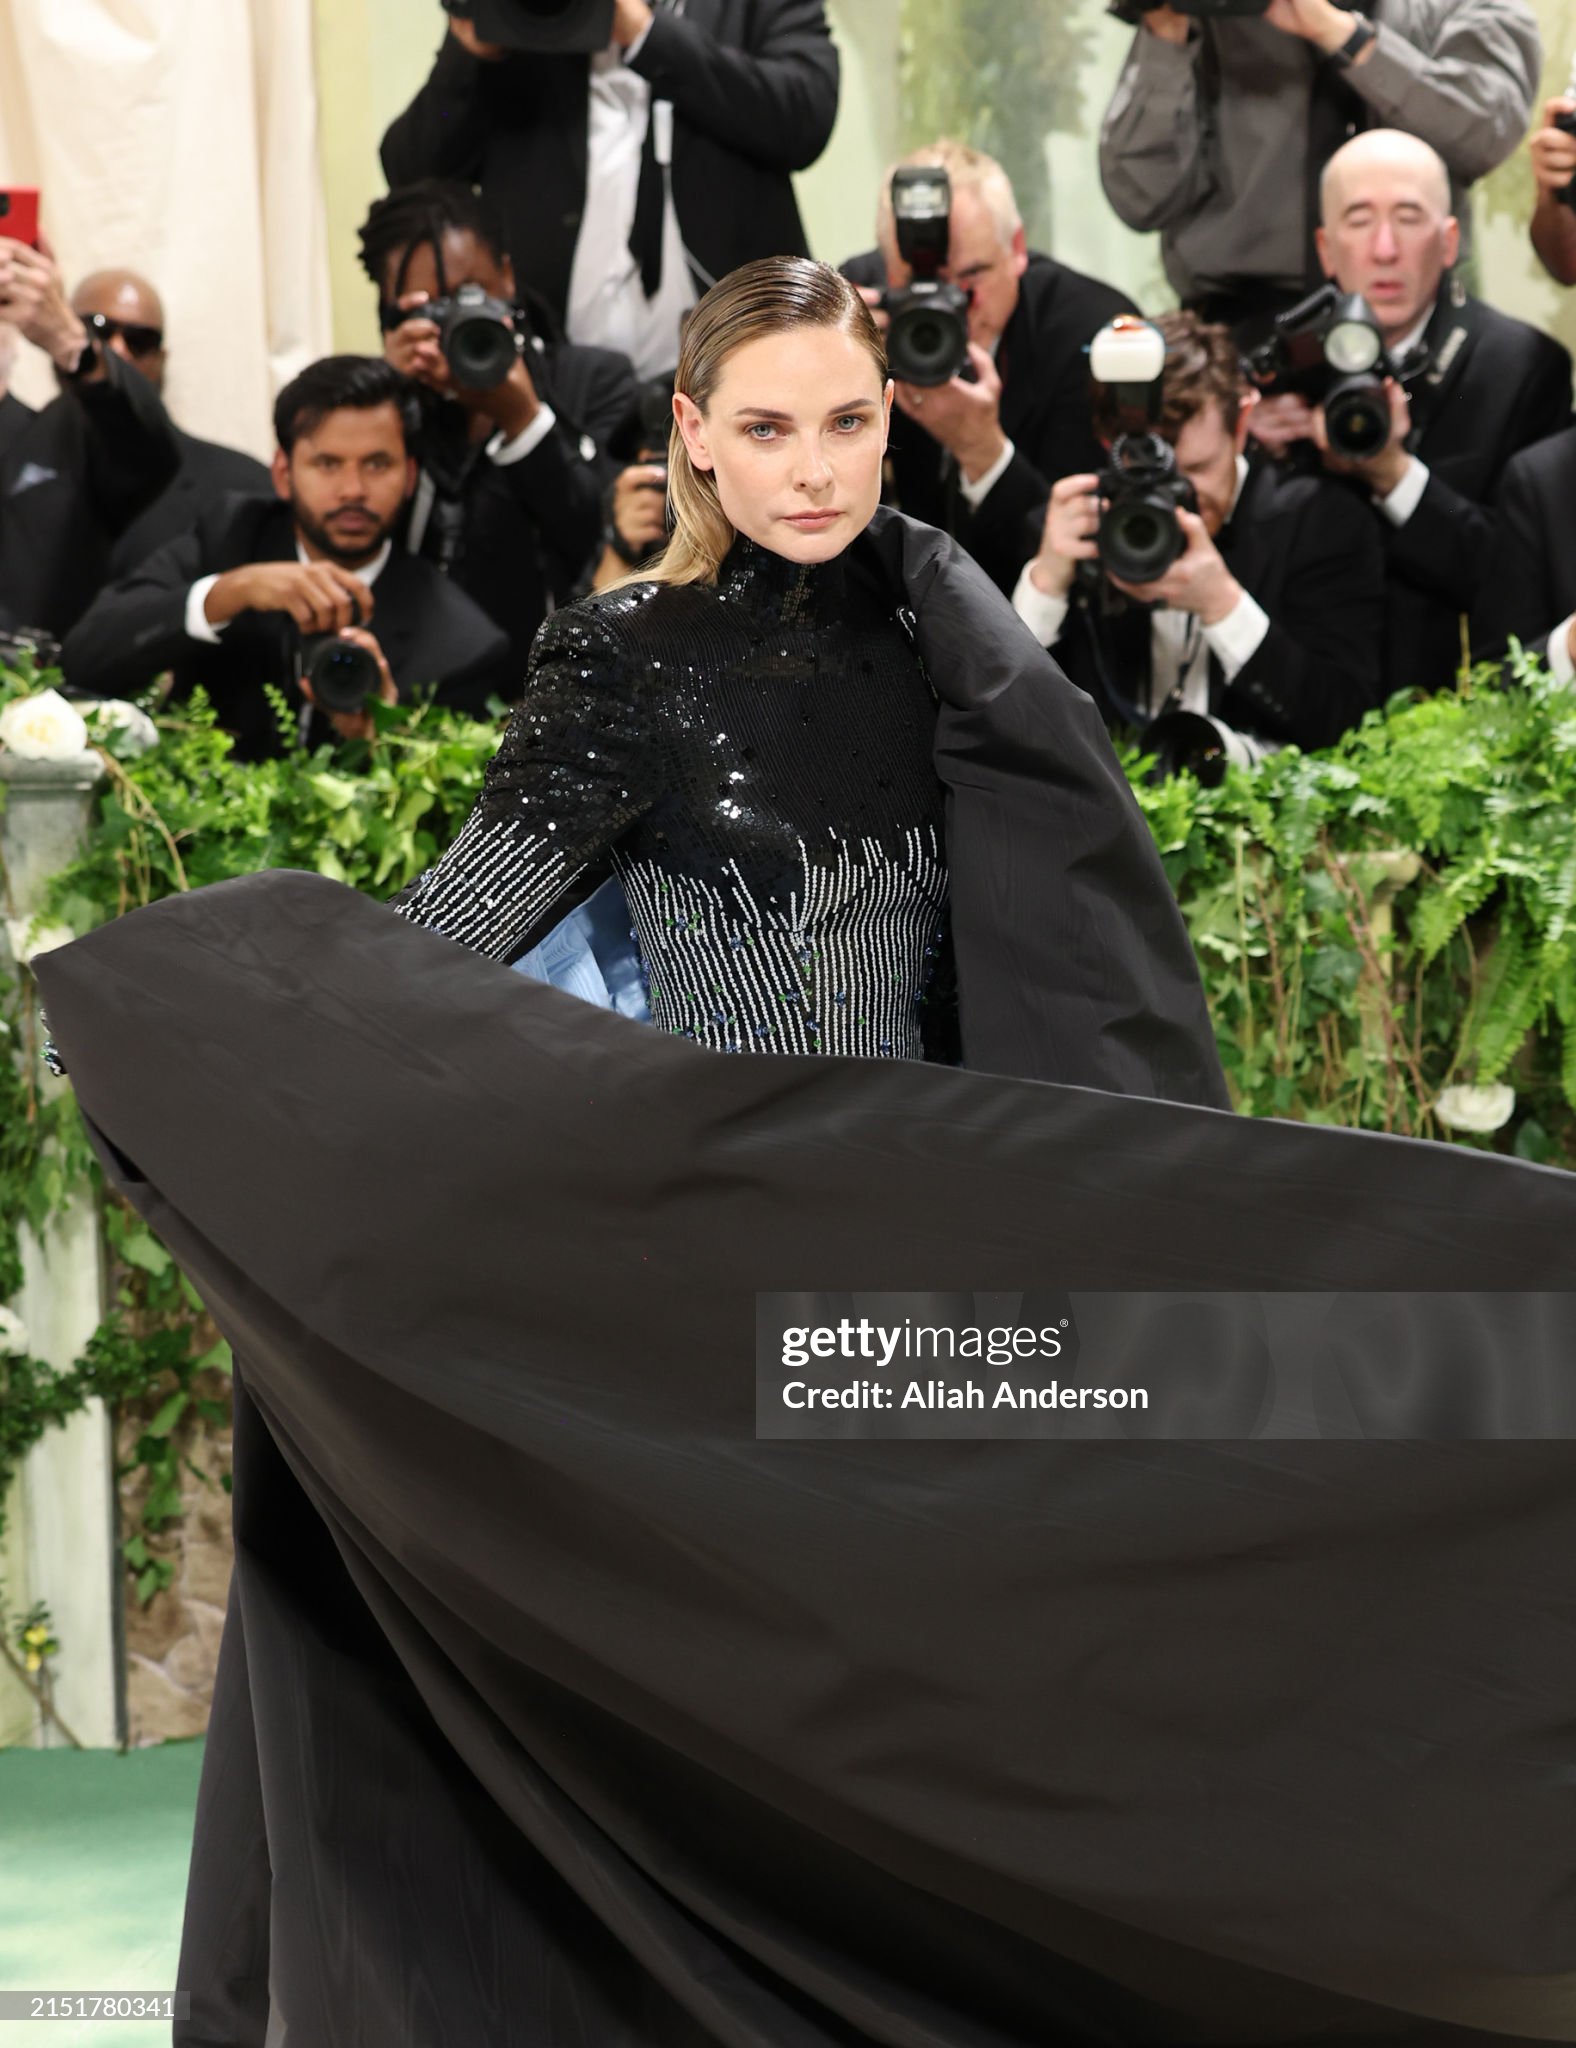 gettyimages-2151780341-2048x2048.jpg